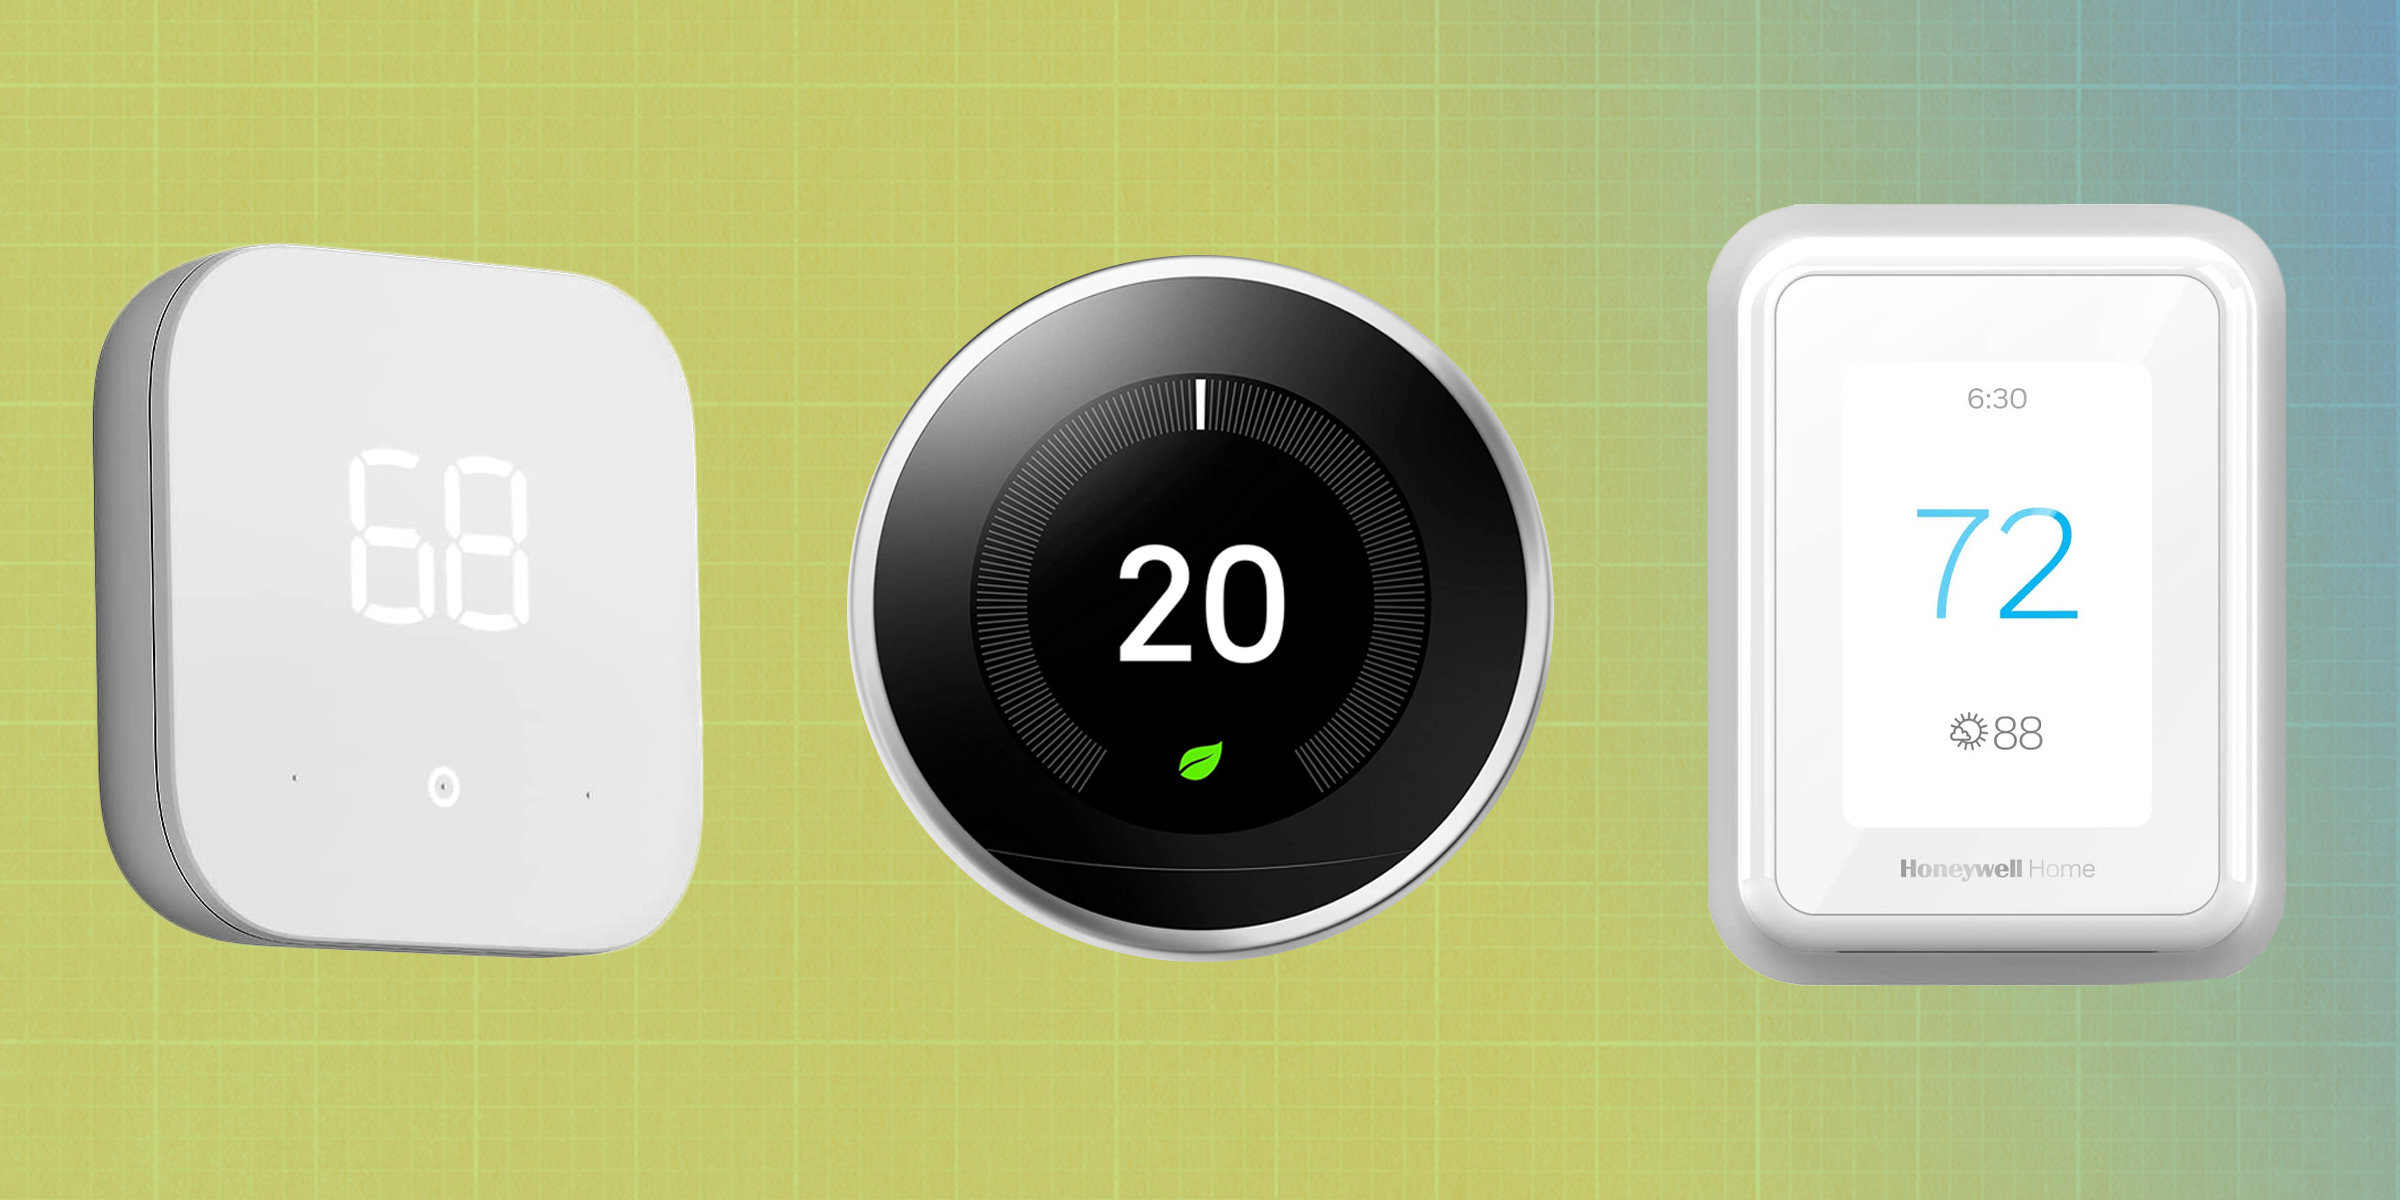 Is Investing in Smart Thermostats the Smart Choice?